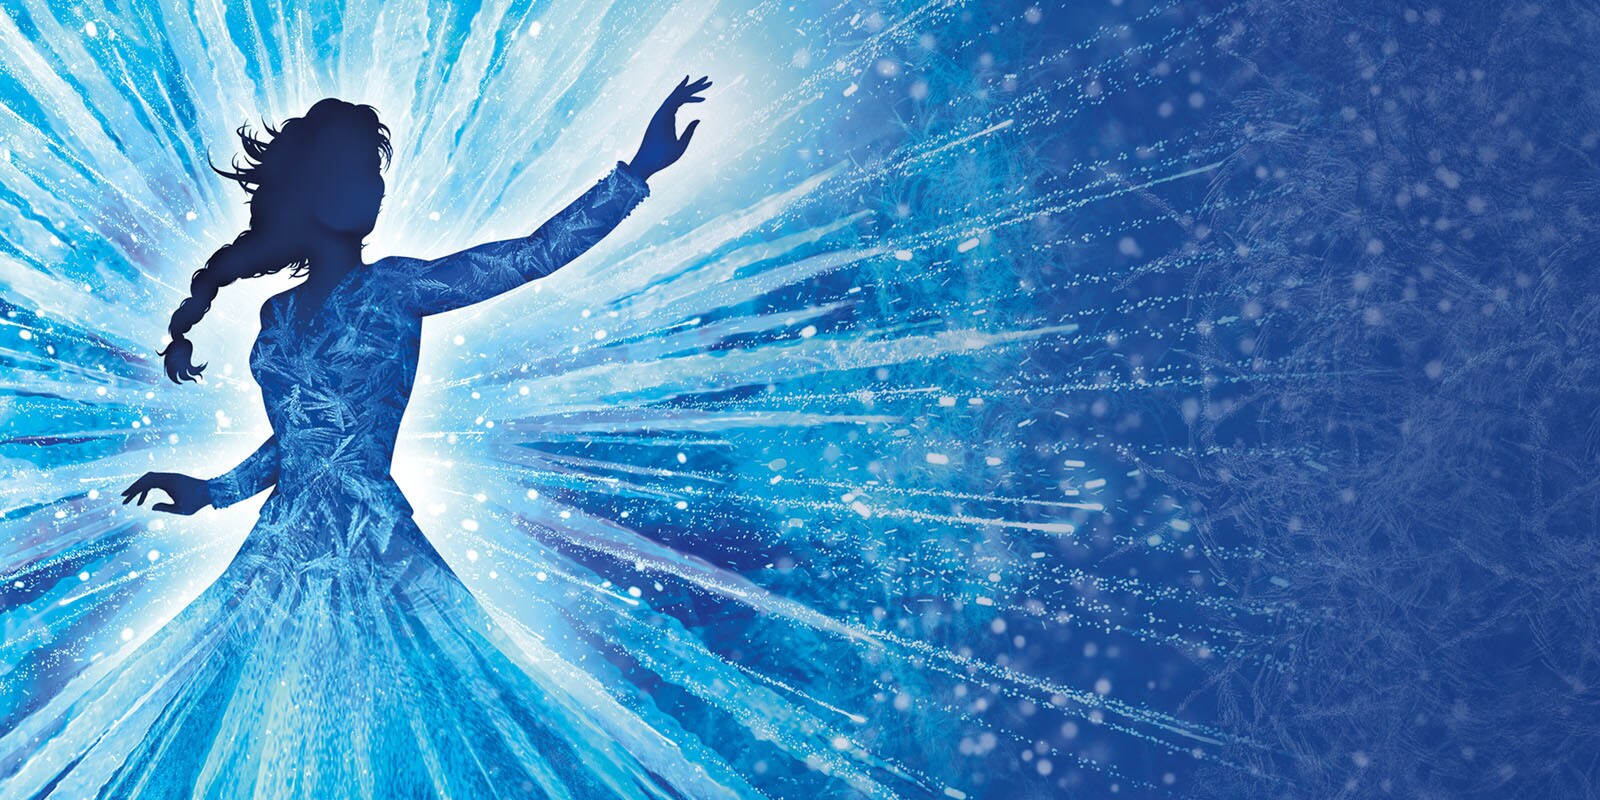 A silhouette of Elsa holding her arm up, with crystals forming around her